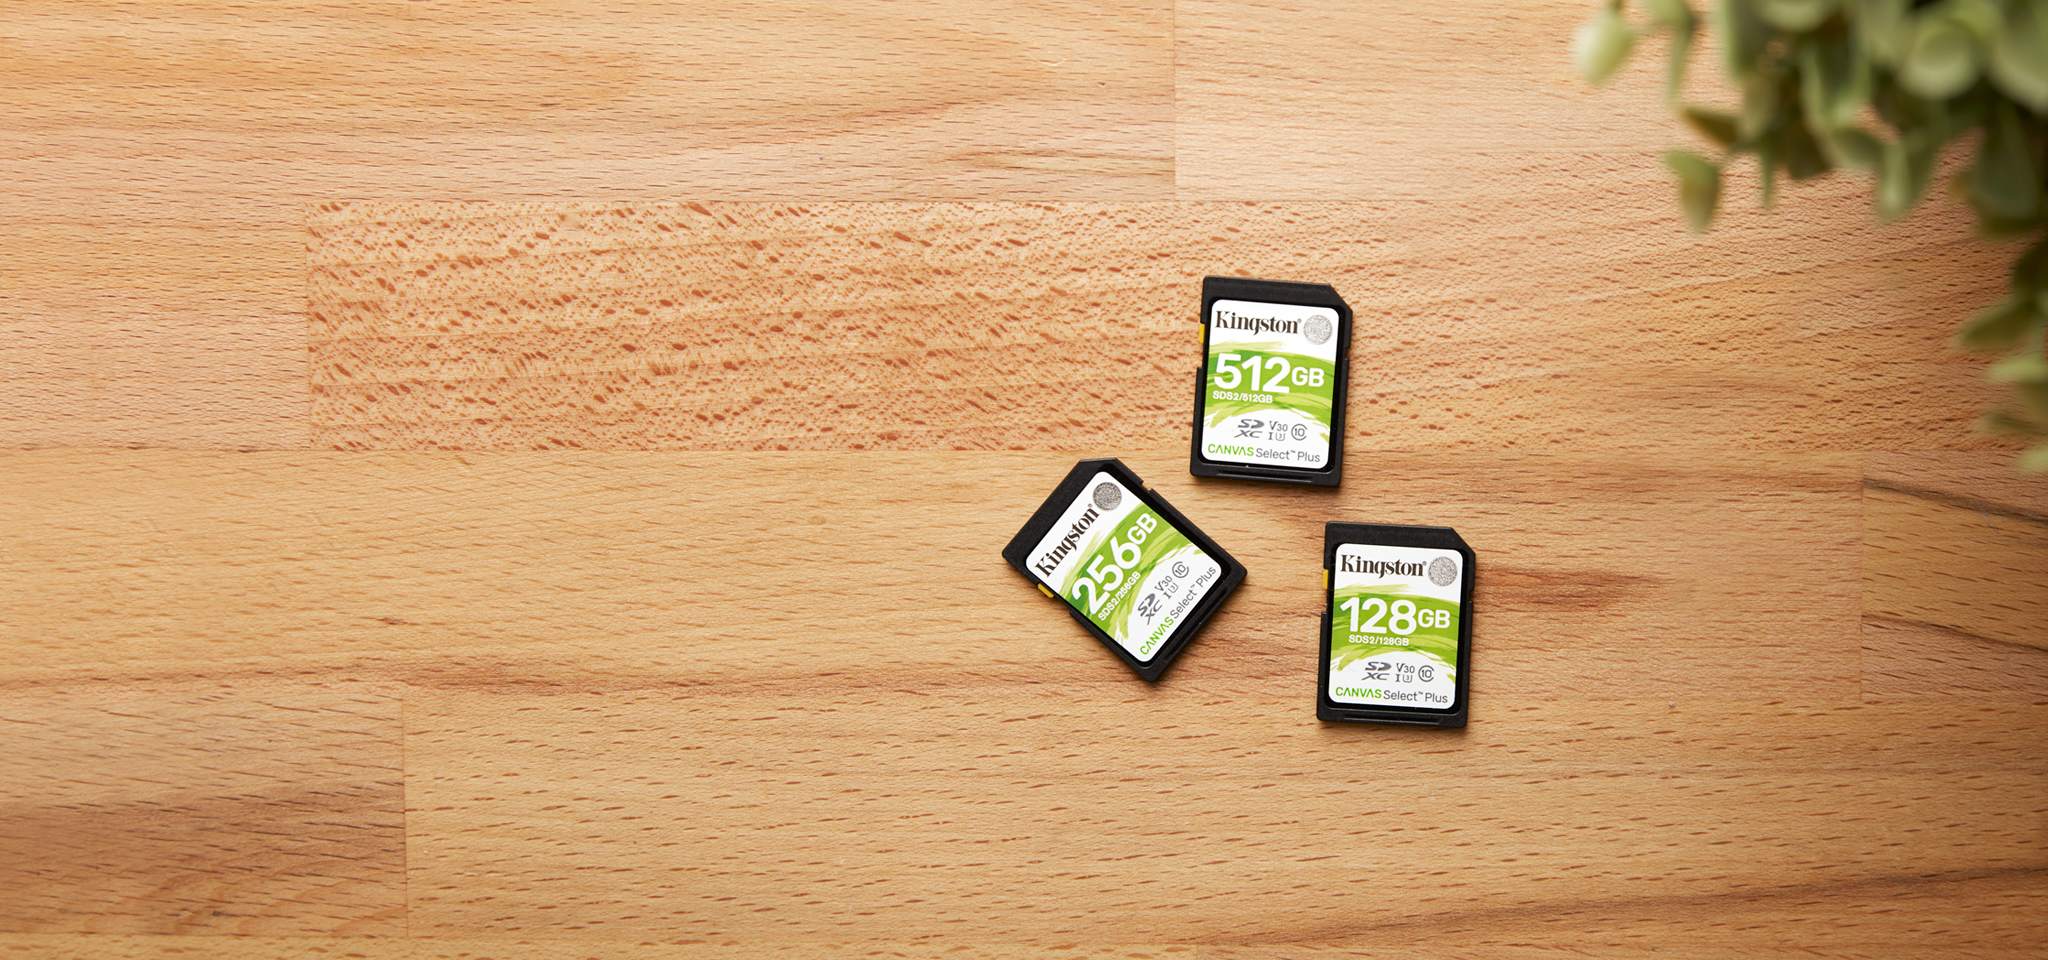 Three Canvas Select Plus SD cards, each with a different capacity, sit on a woodgrain desk